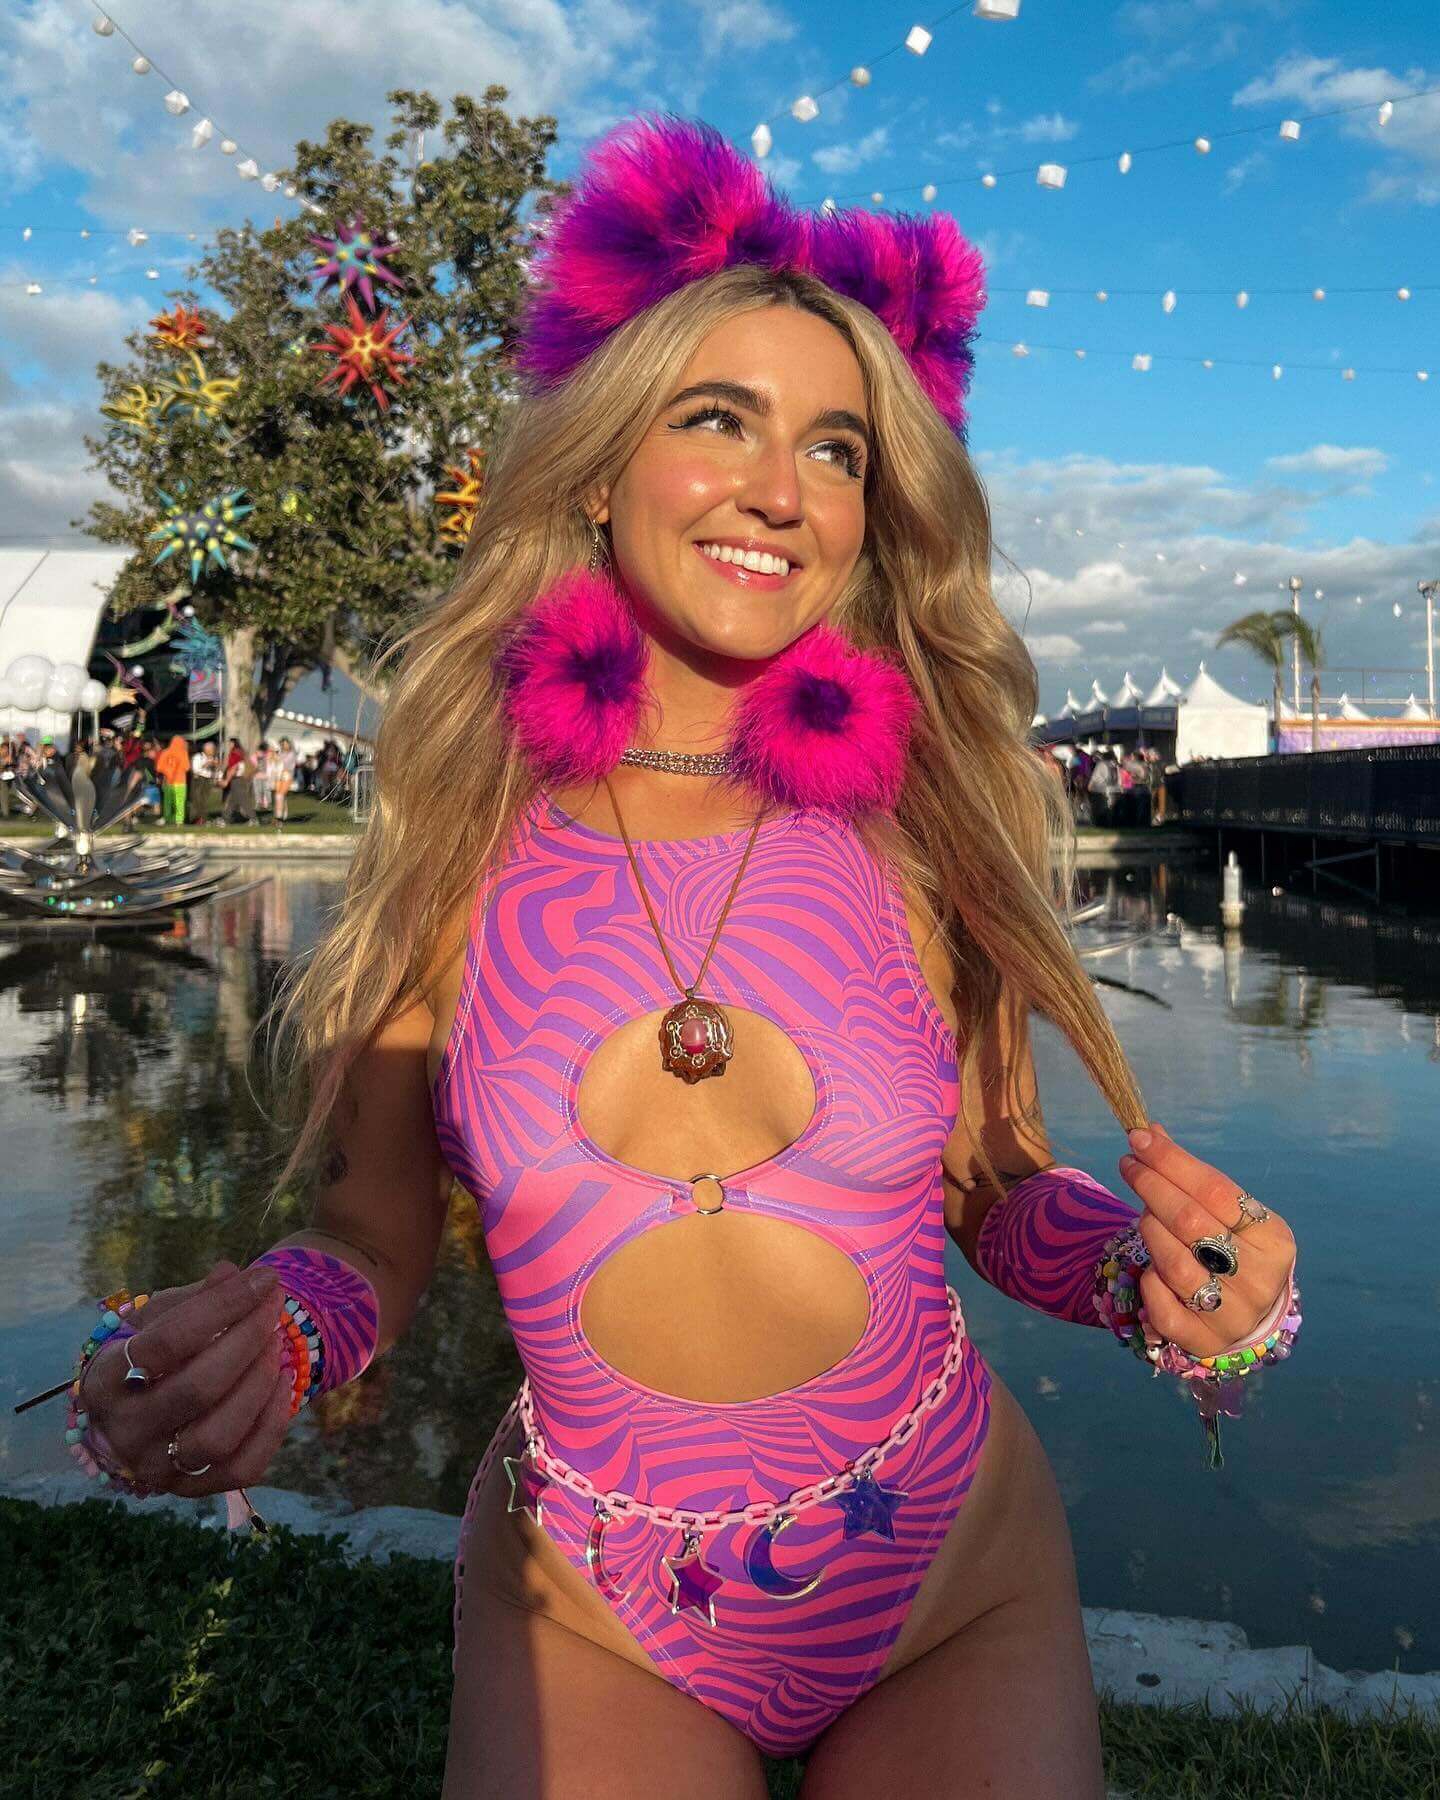 A photo of a woman wearing a pink and purple swirled bodysuit with two keyhole cutouts. She is wearing fluffy pink and purple accessories. She is standing in front of the water and smiling. 